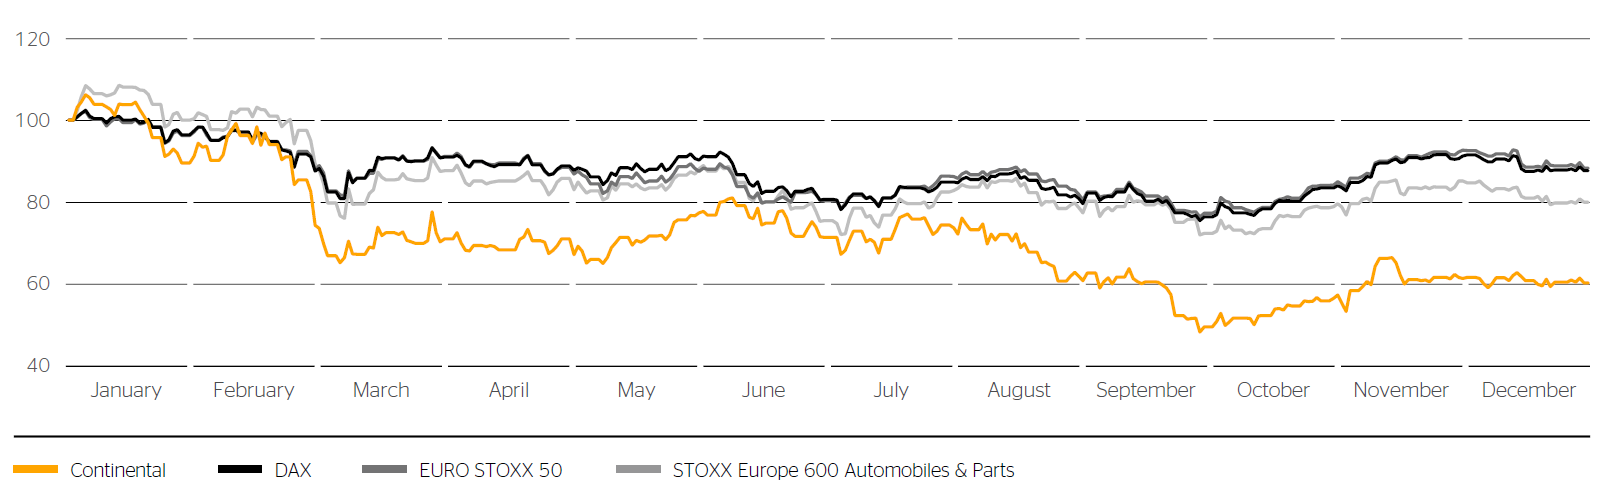 Price performance of Continental shares in 2022 versus selected stock indexes